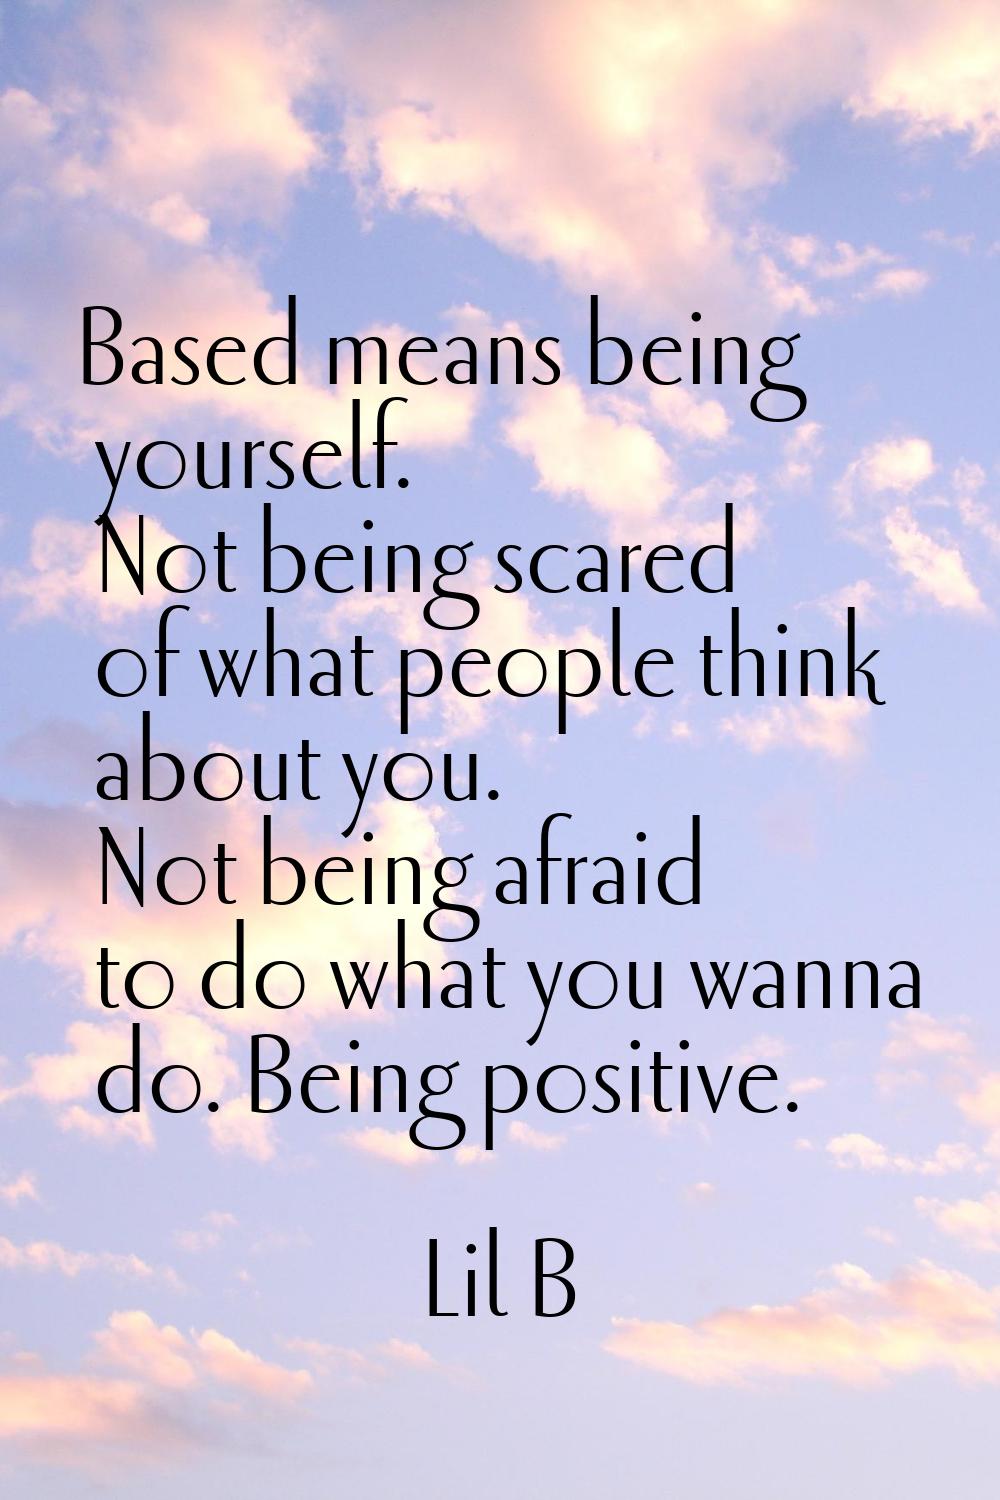 Based means being yourself. Not being scared of what people think about you. Not being afraid to do